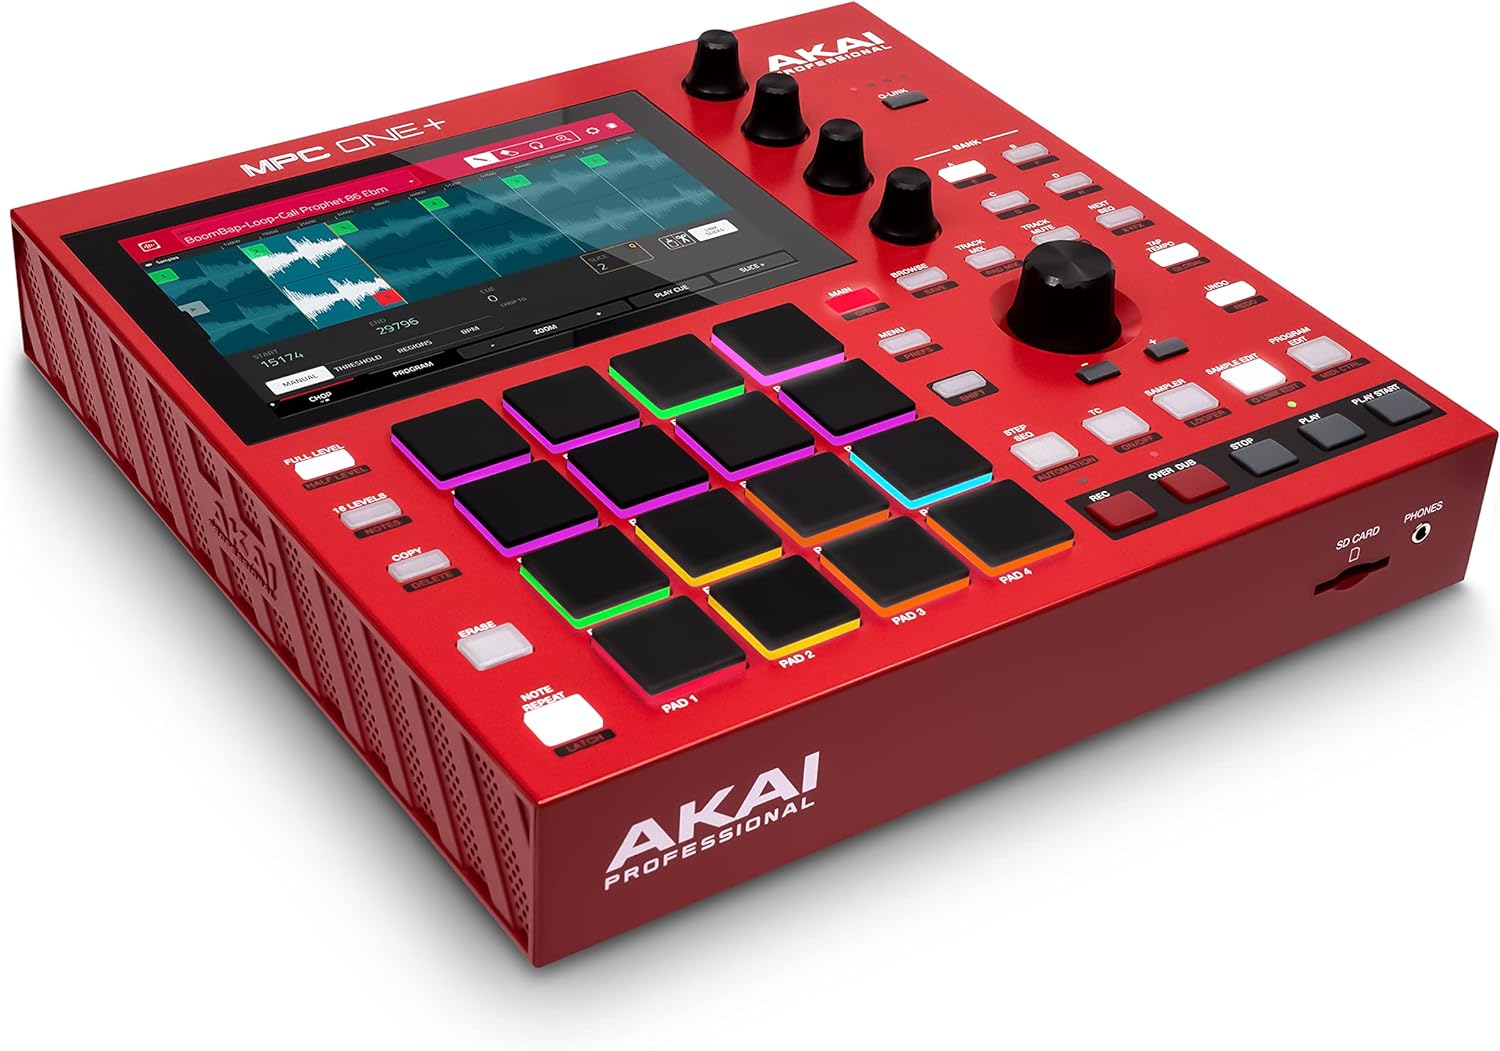 AKAI Professional MPC One+ Standalone Drum Machine, Beat Maker and MIDI Controller with WiFi, Bluetooth, Drum Pads, Synth Plug-ins and Touchscreen